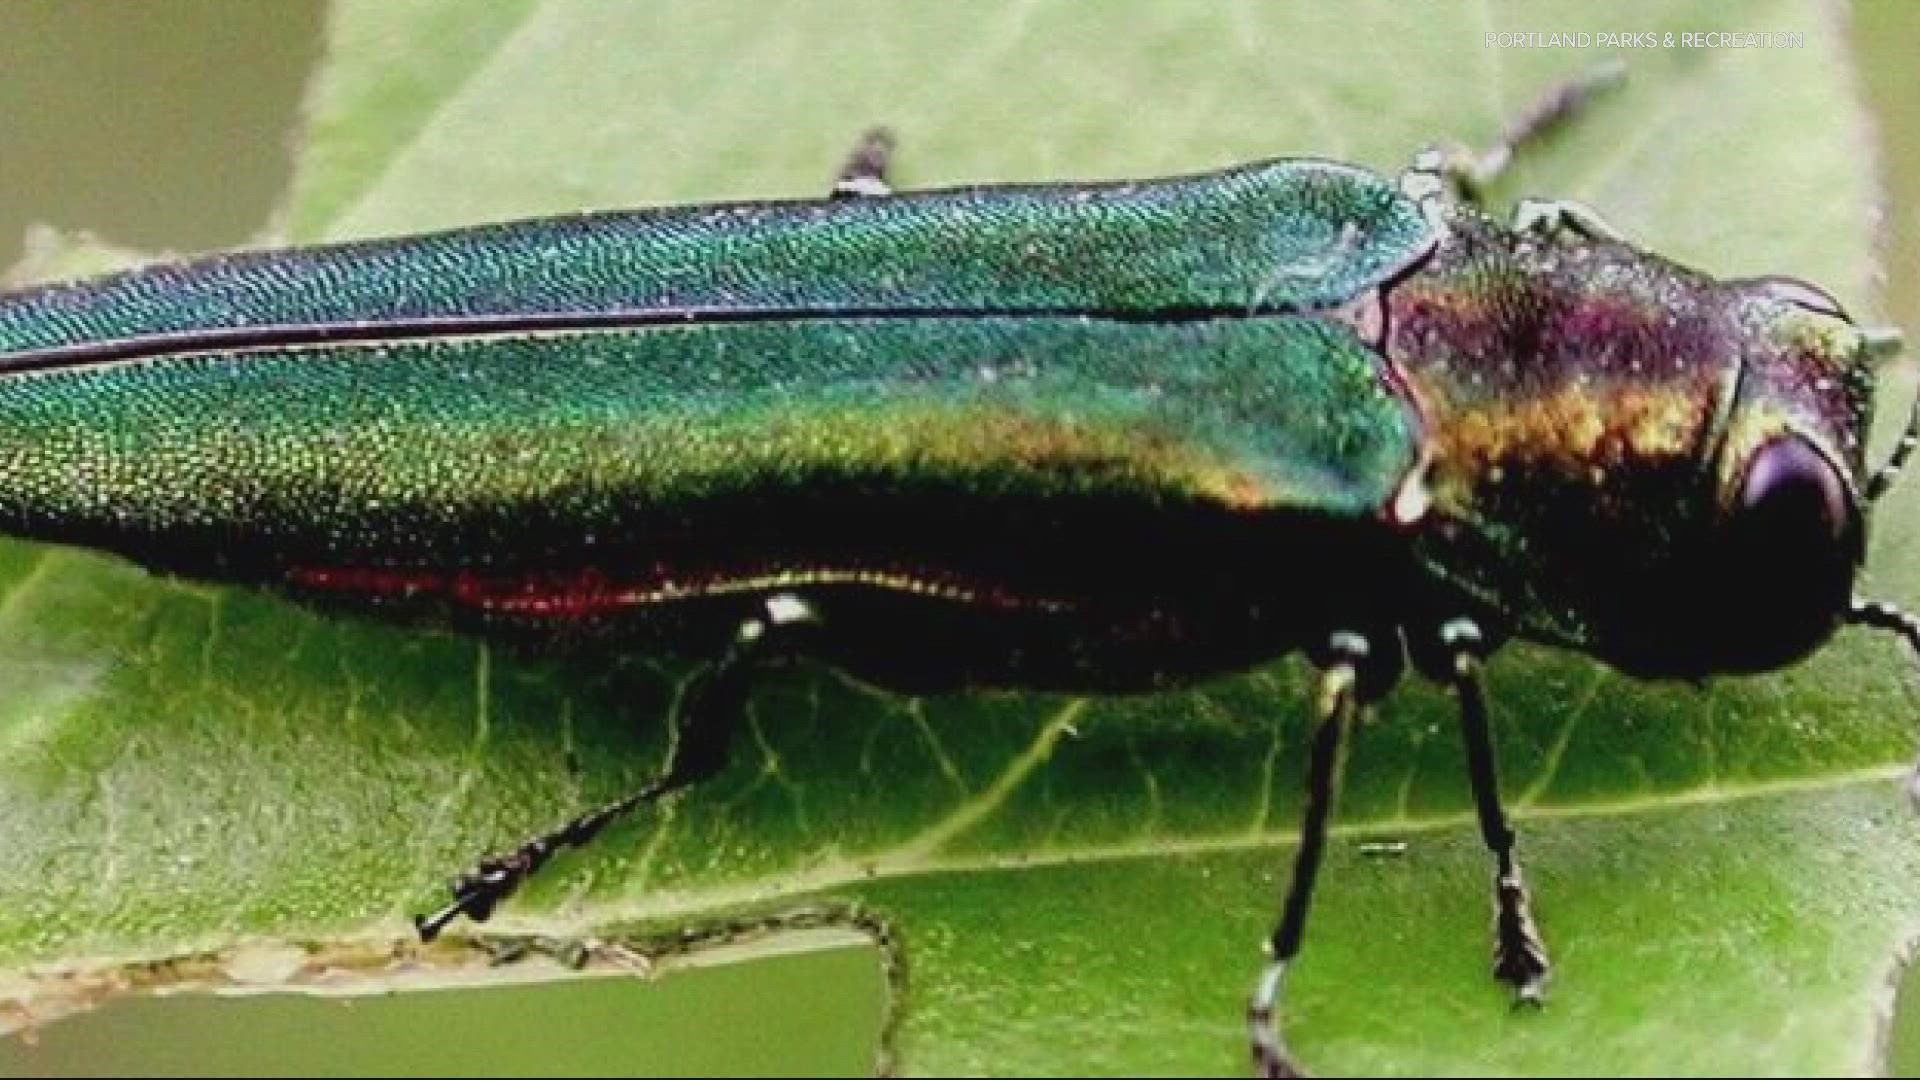 The Emerald Ash Borer beetle has been described as the most destructive forest pest in the country, but hasn't been seen on the west coast until now.